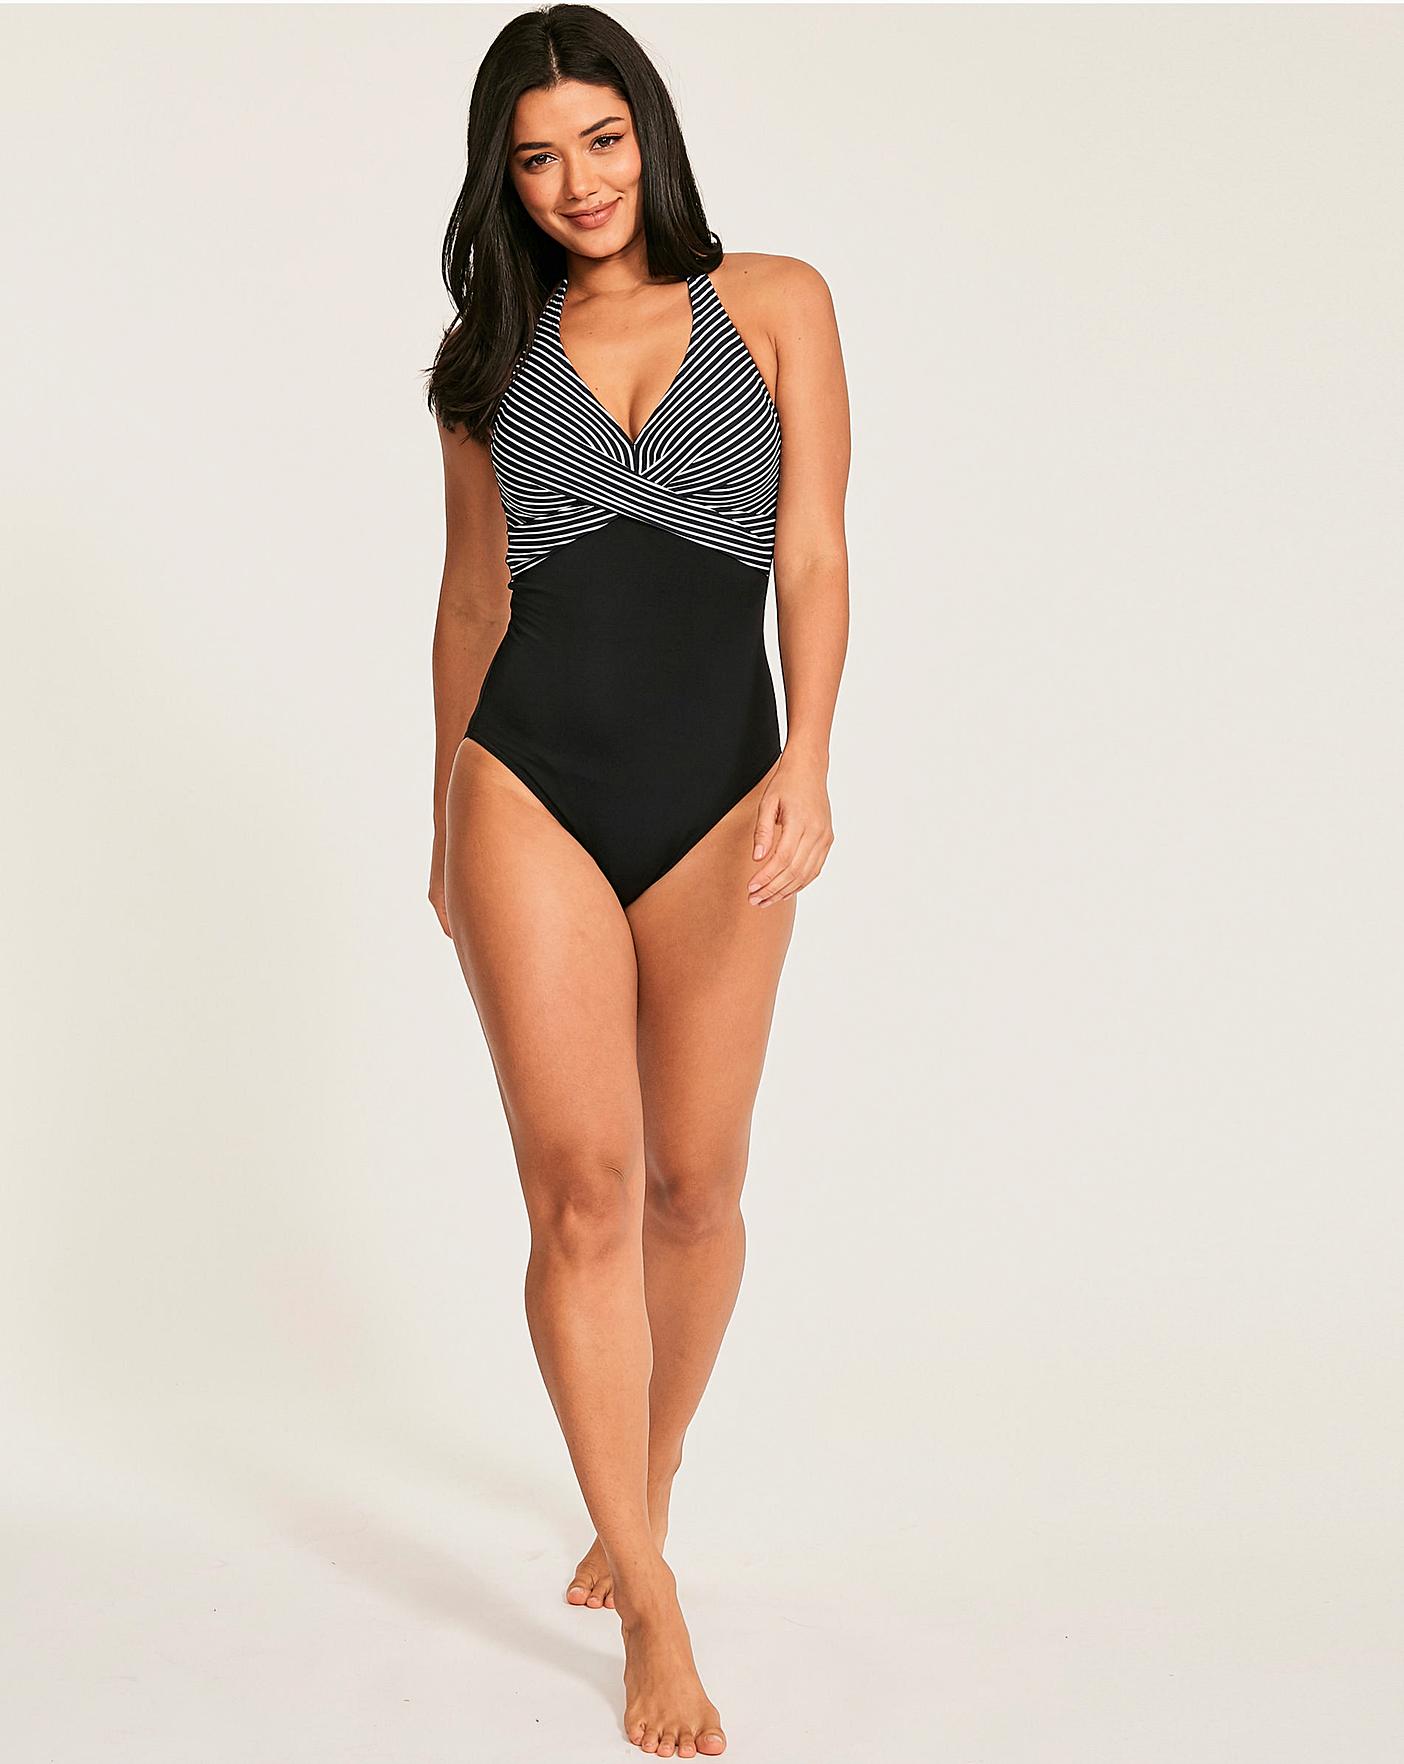 Figleaves womens one piece swimsuit. Neck and halter style